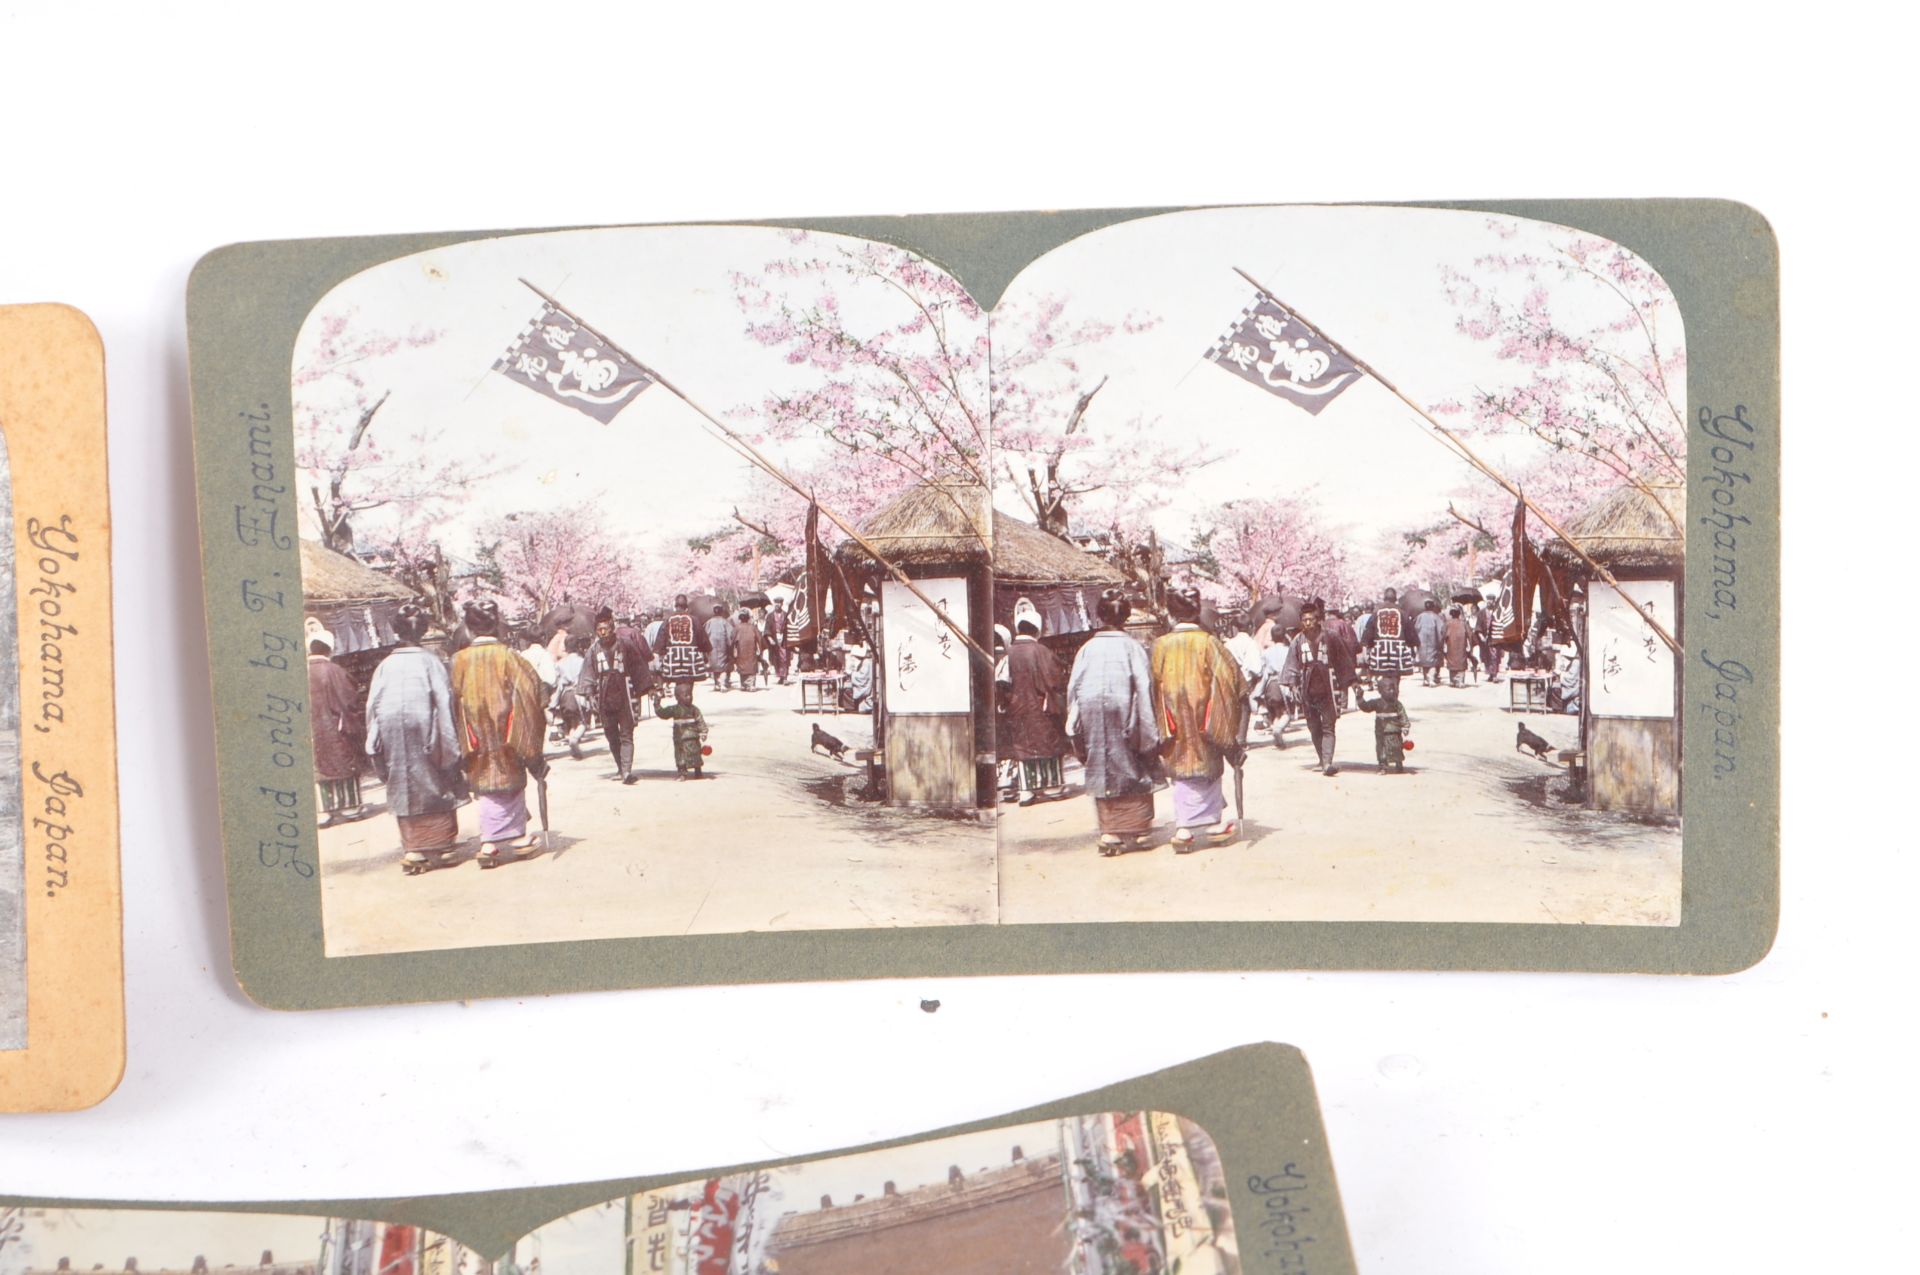 CIRCA. 1970S STEREOSCOPE VIEWER WITH SLIDES OF JAPAN - Image 7 of 8